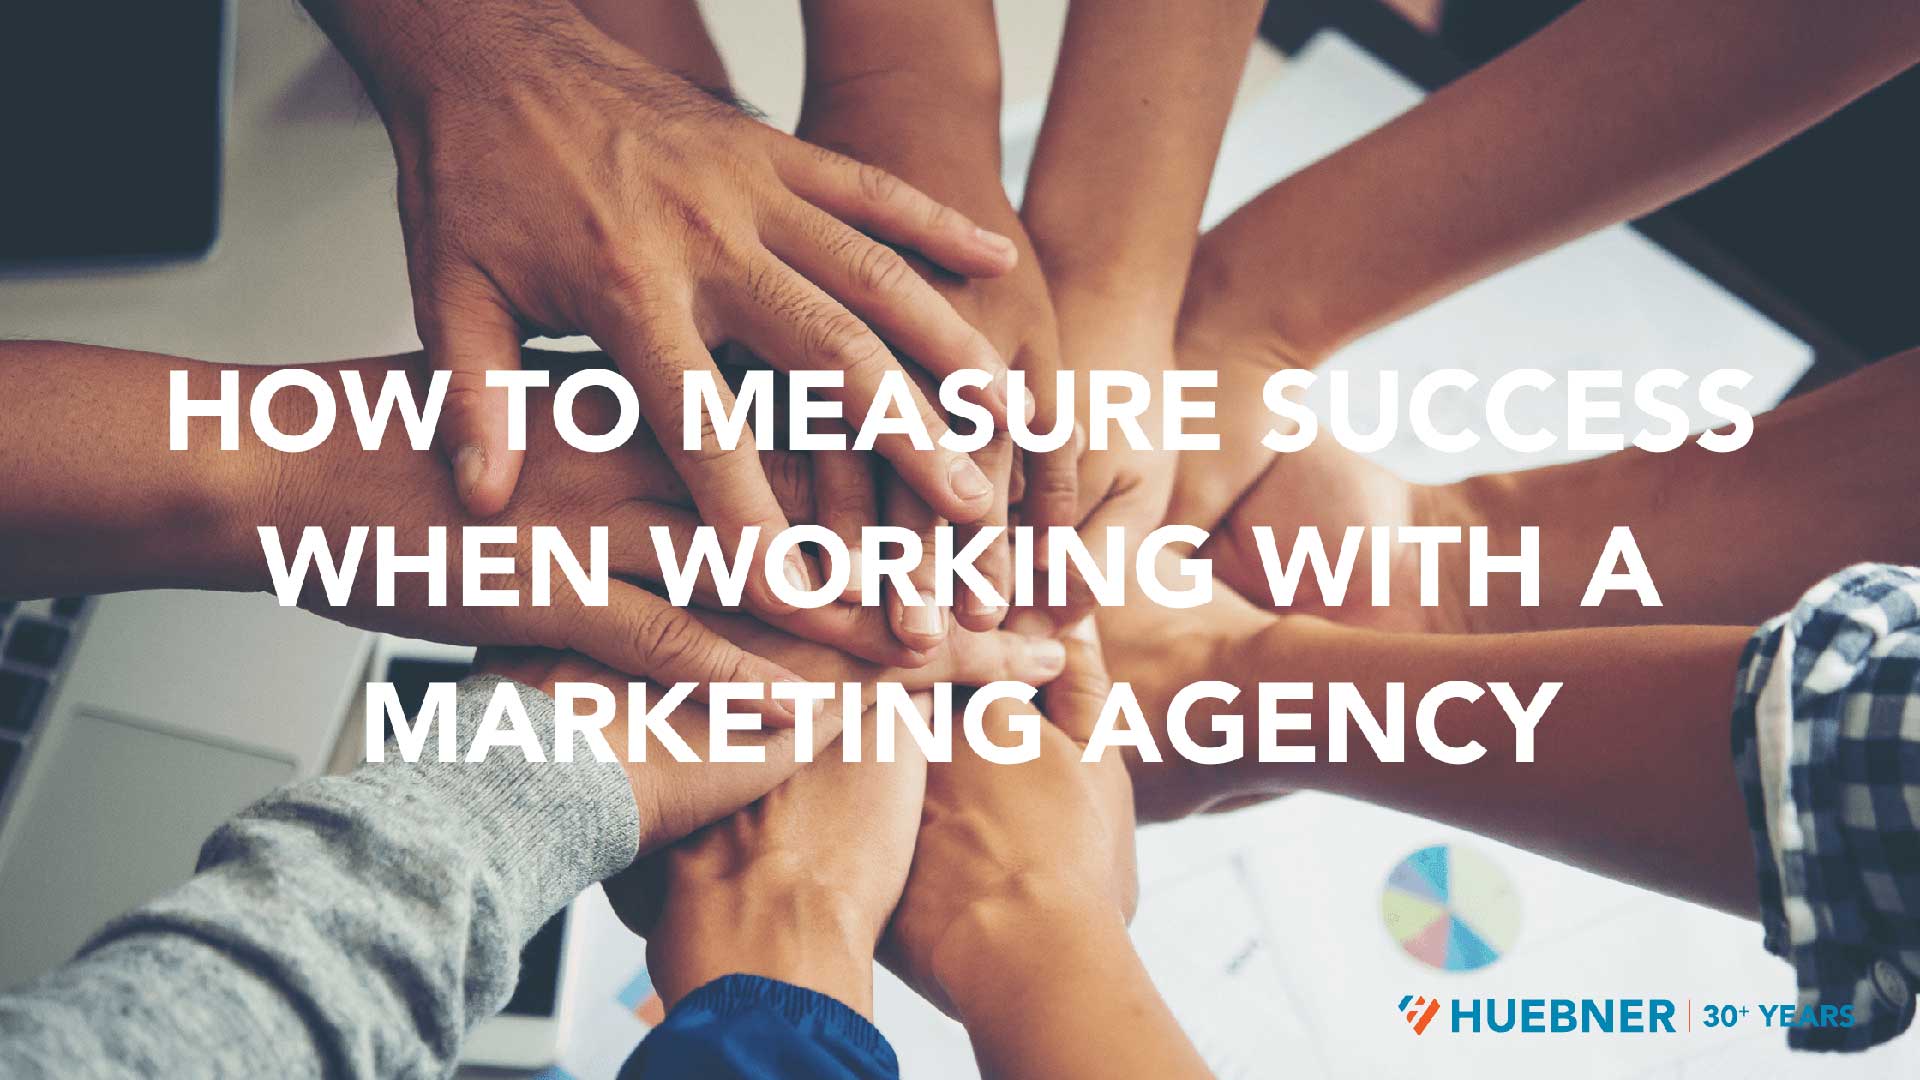 How to Measure Success when Working with a Marketing Agency